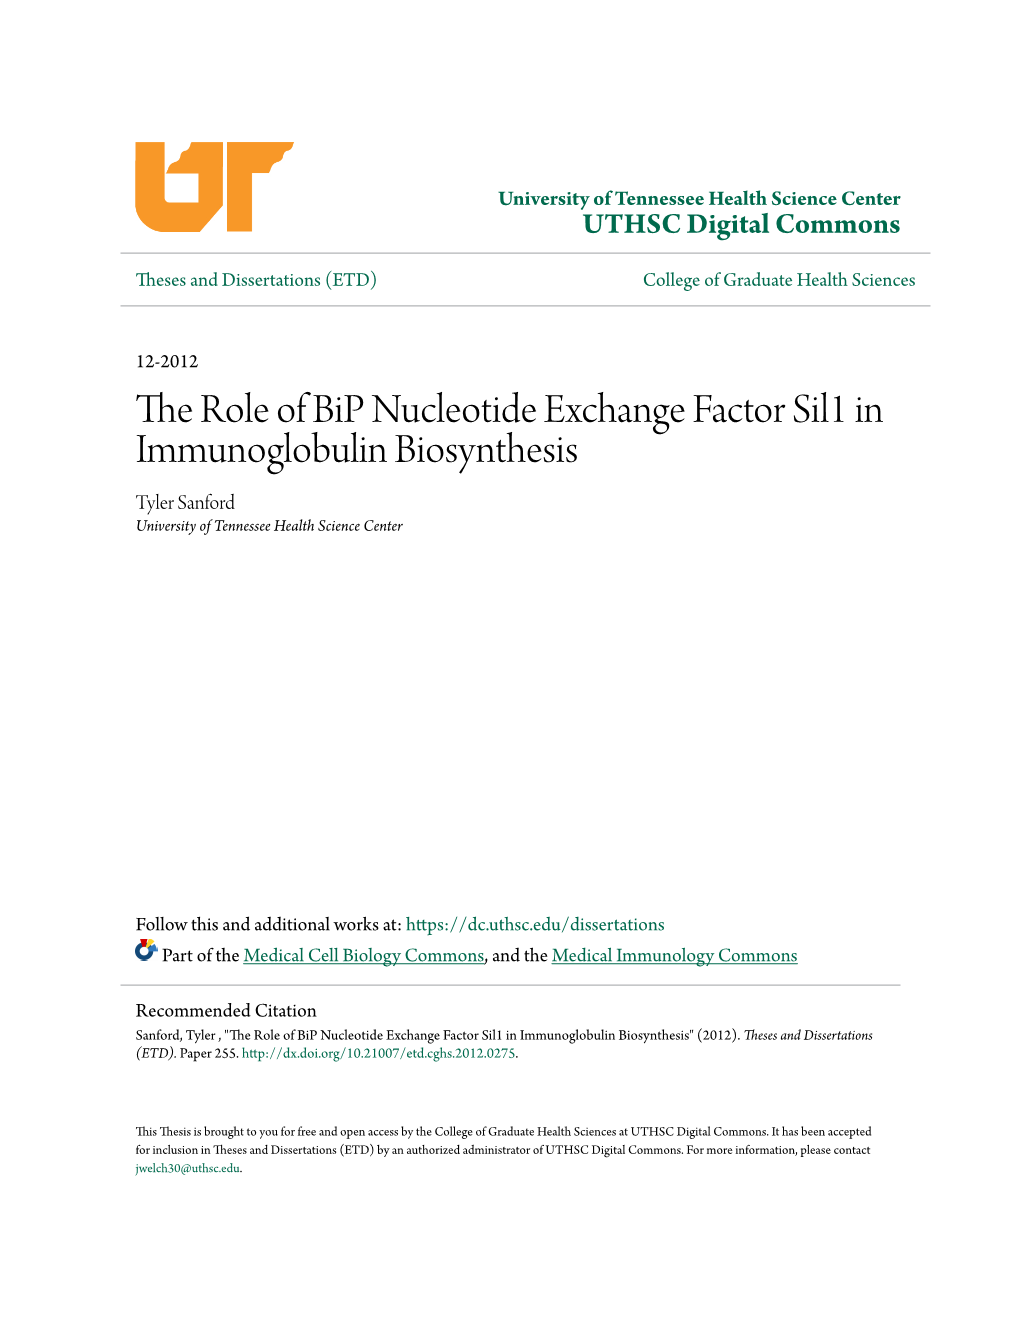 The Role of Bip Nucleotide Exchange Factor Sil1 in Immunoglobulin Biosynthesis Tyler Sanford University of Tennessee Health Science Center